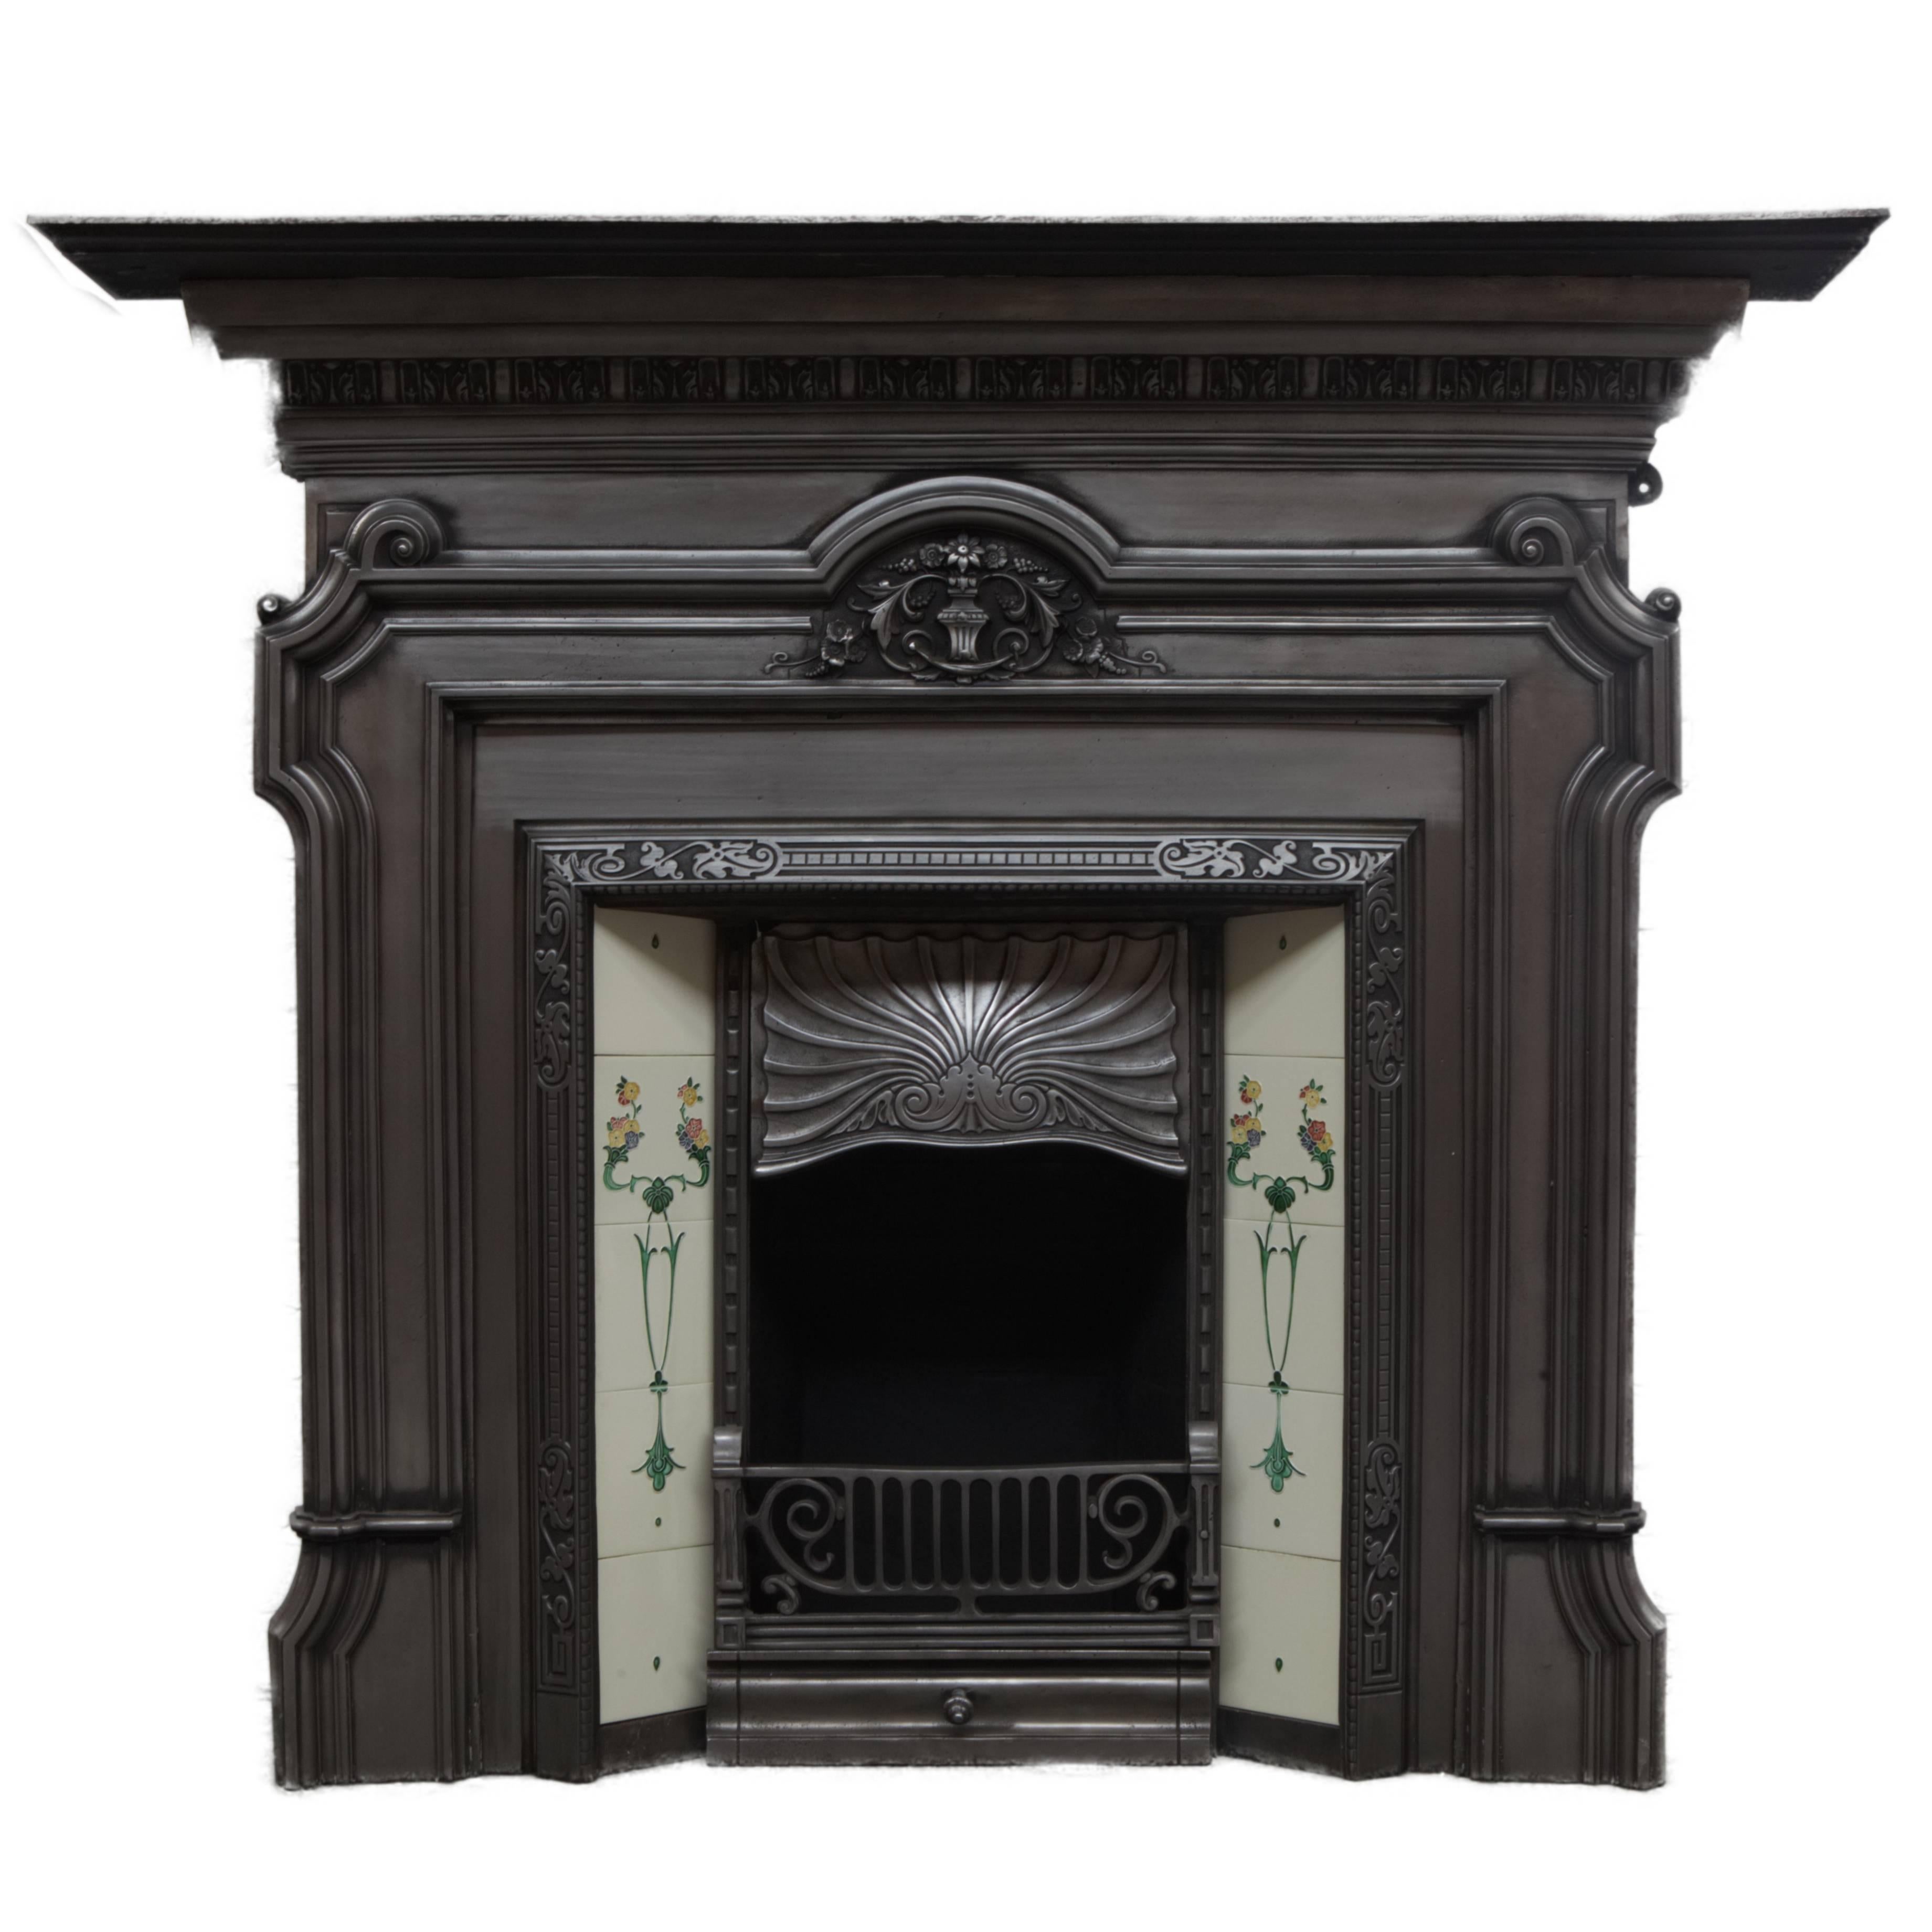 19th Century Polished Cast Iron Victorian Fireplace Surround and Tiled Insert